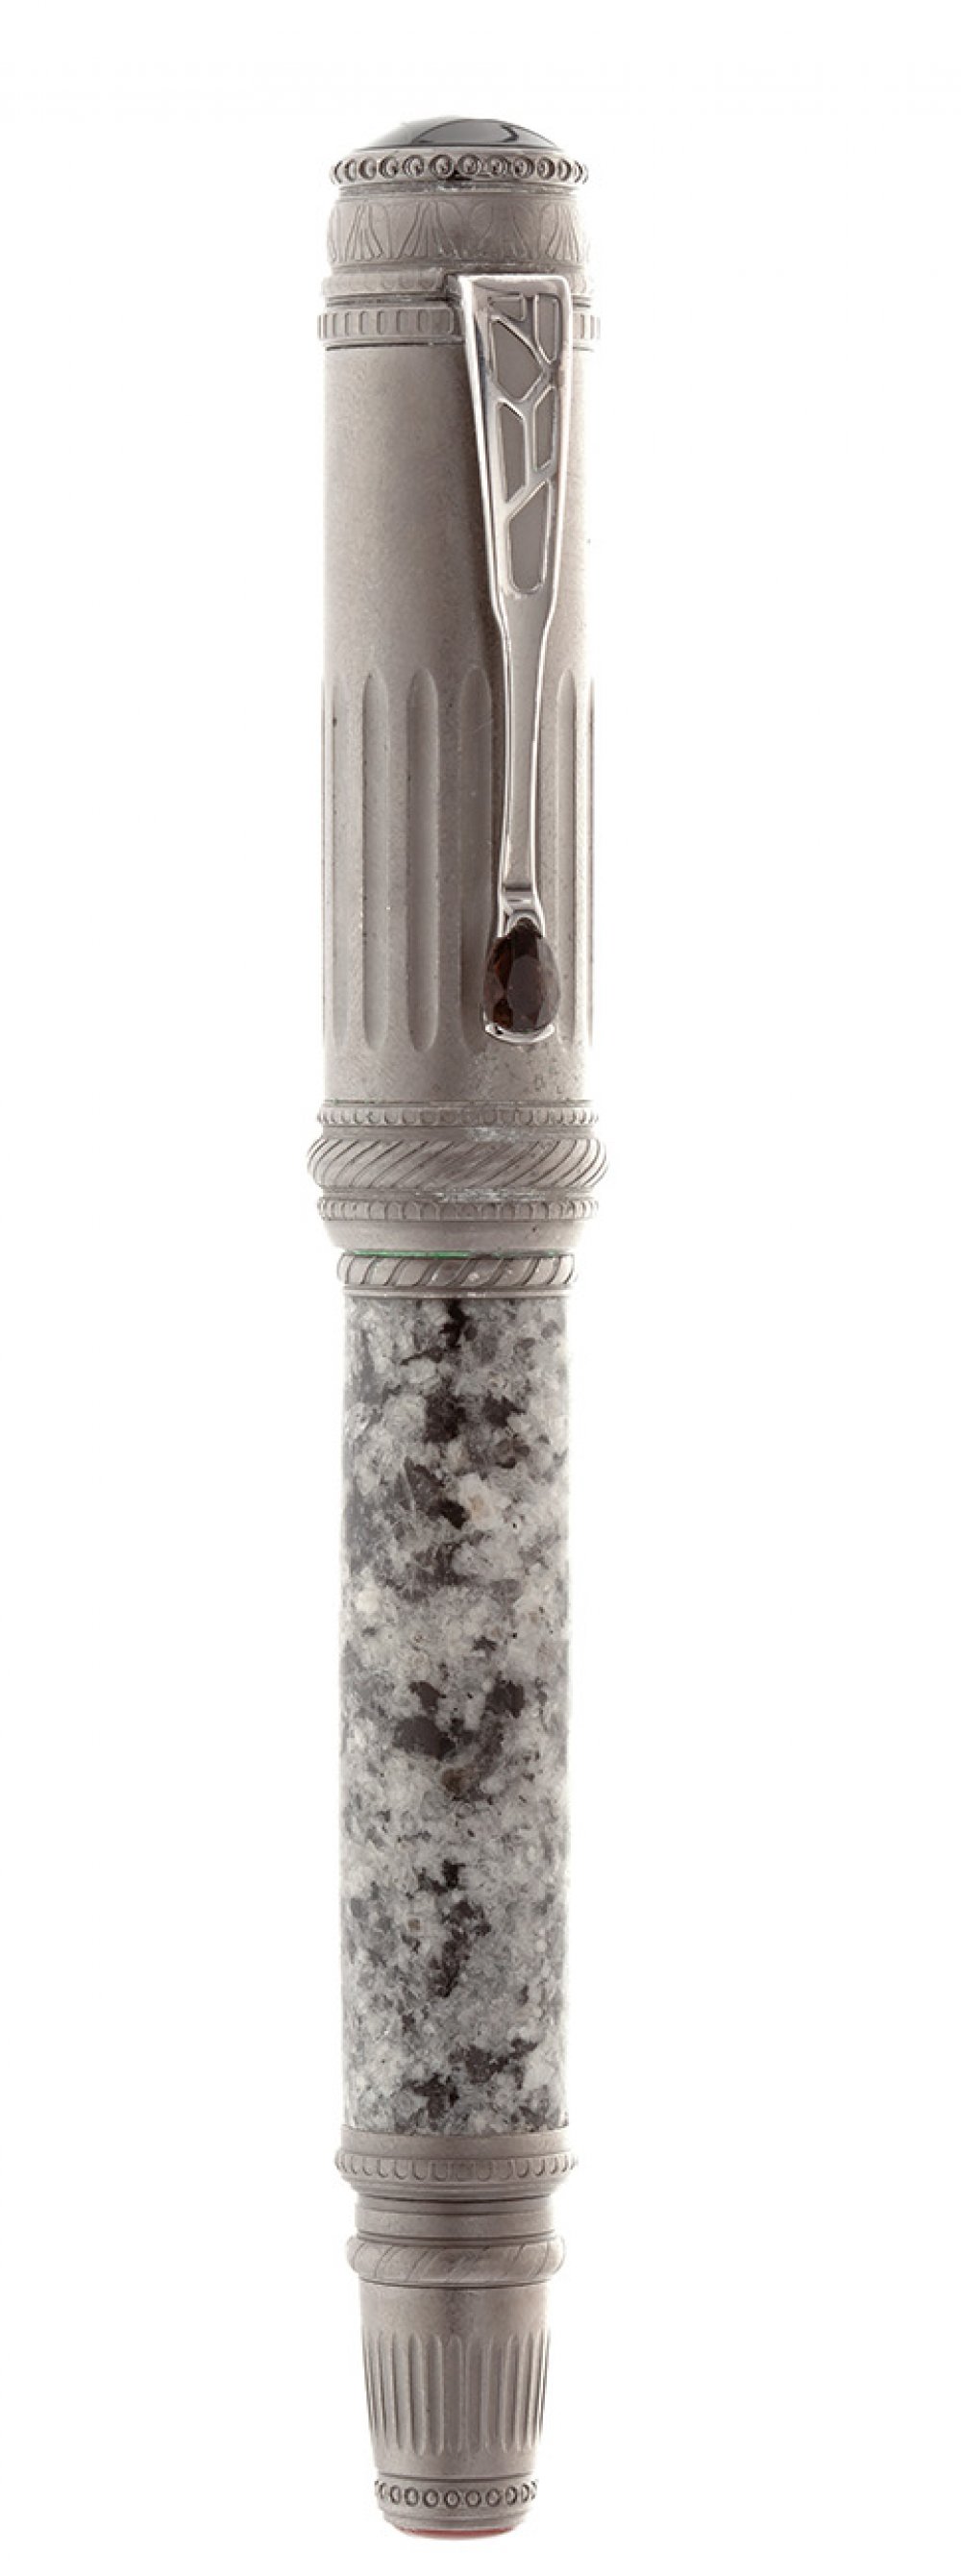 MONTBLANC "SCIPIONE BORGHESE" FOUNTAIN PEN.Resin and silver barrel.Nib of 18 Kts gold decorated with